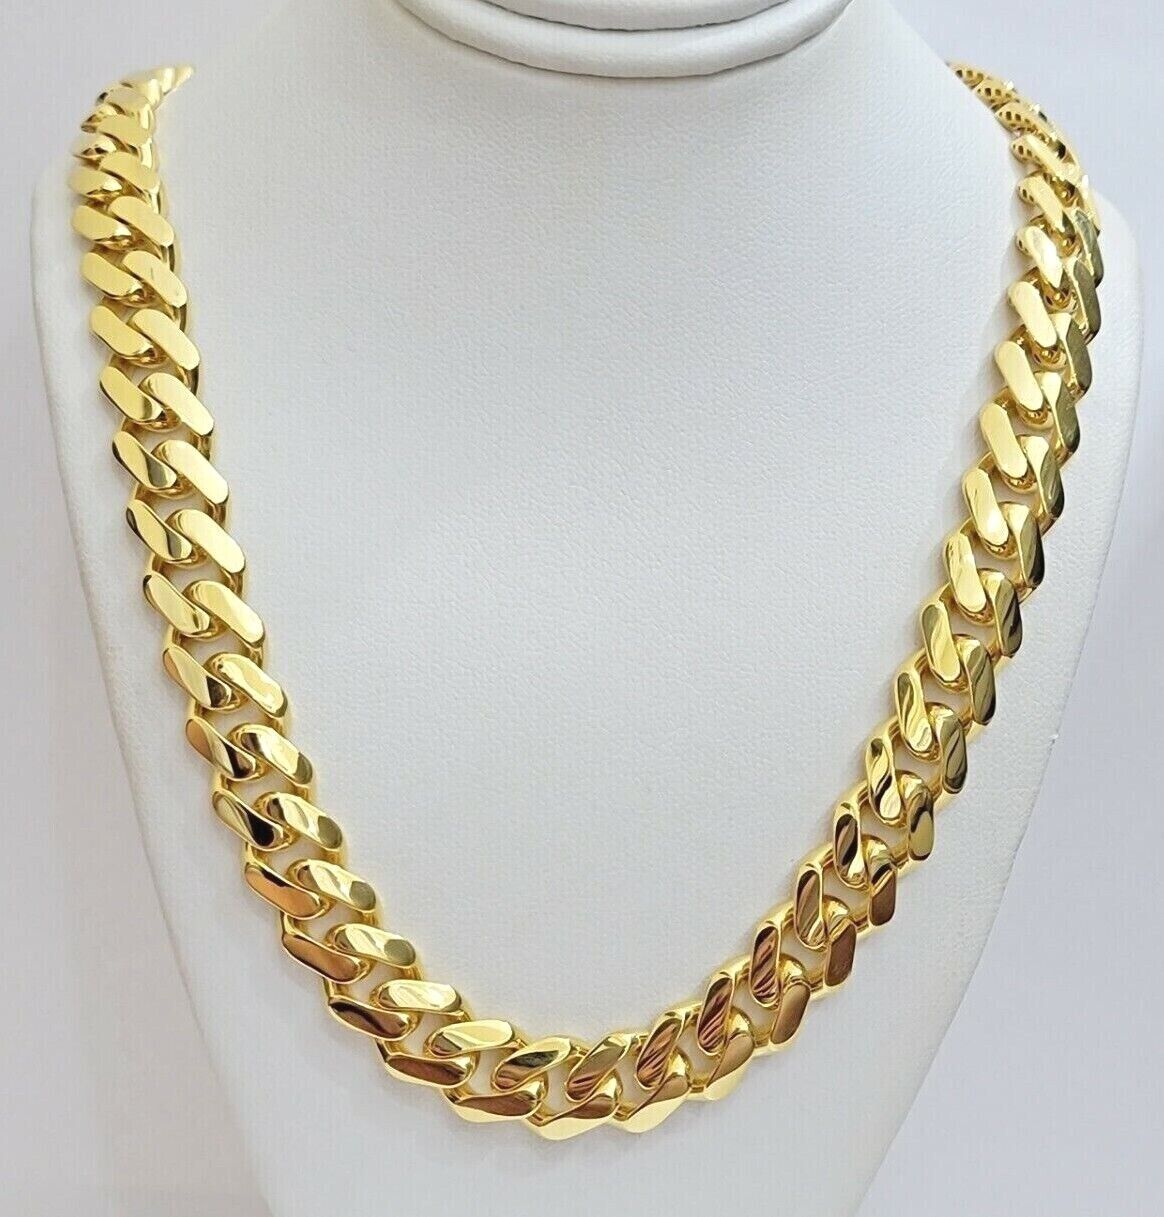 Real 10k Yellow Gold Monaco Chain Bracelet Set 17 mm 22 Inch Necklace 9